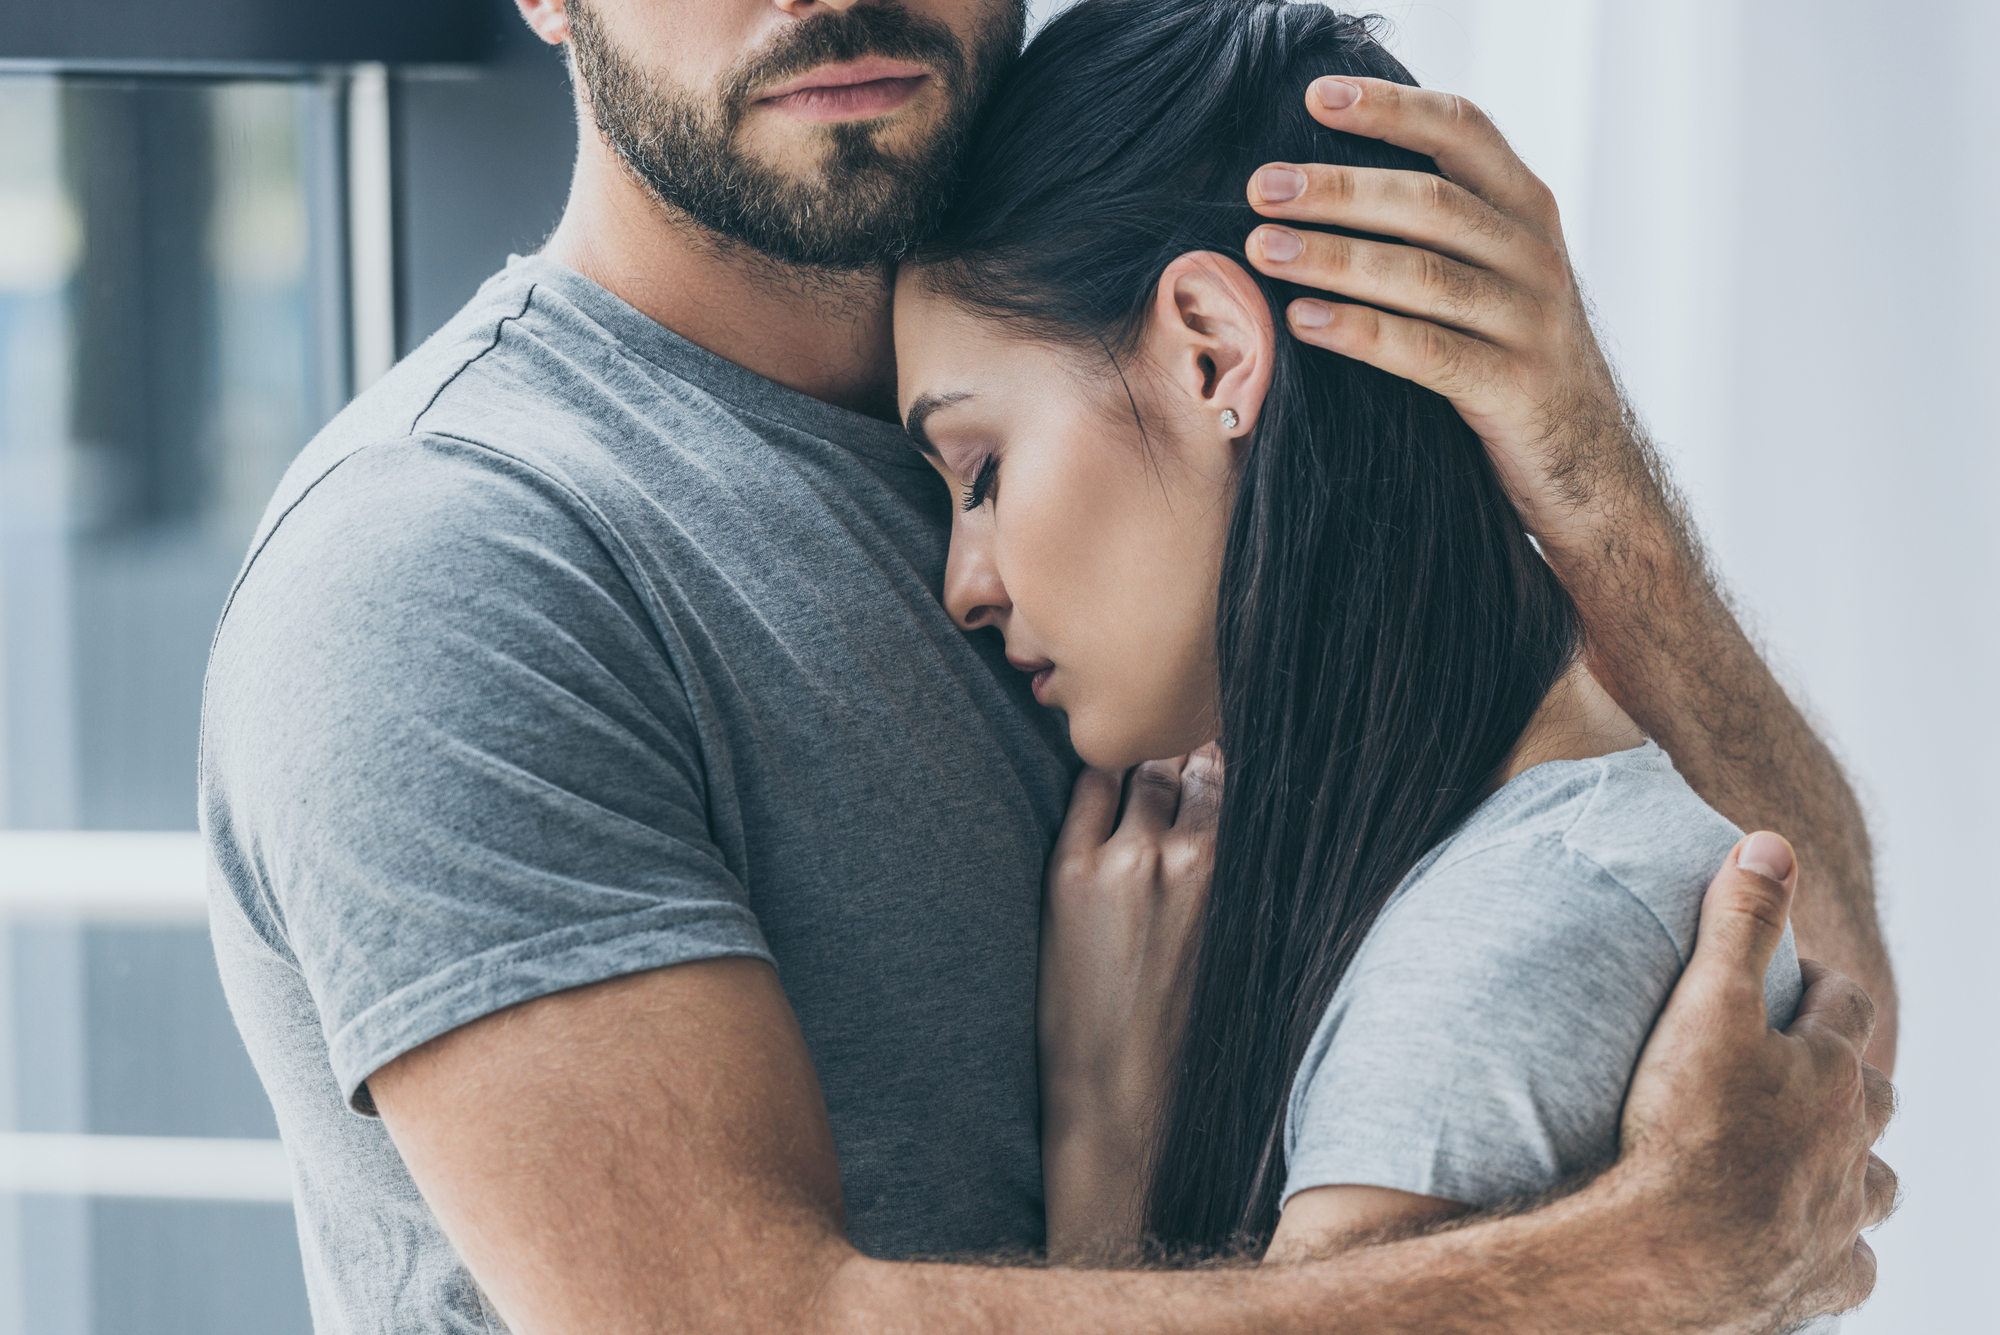 Upset woman in man's arms